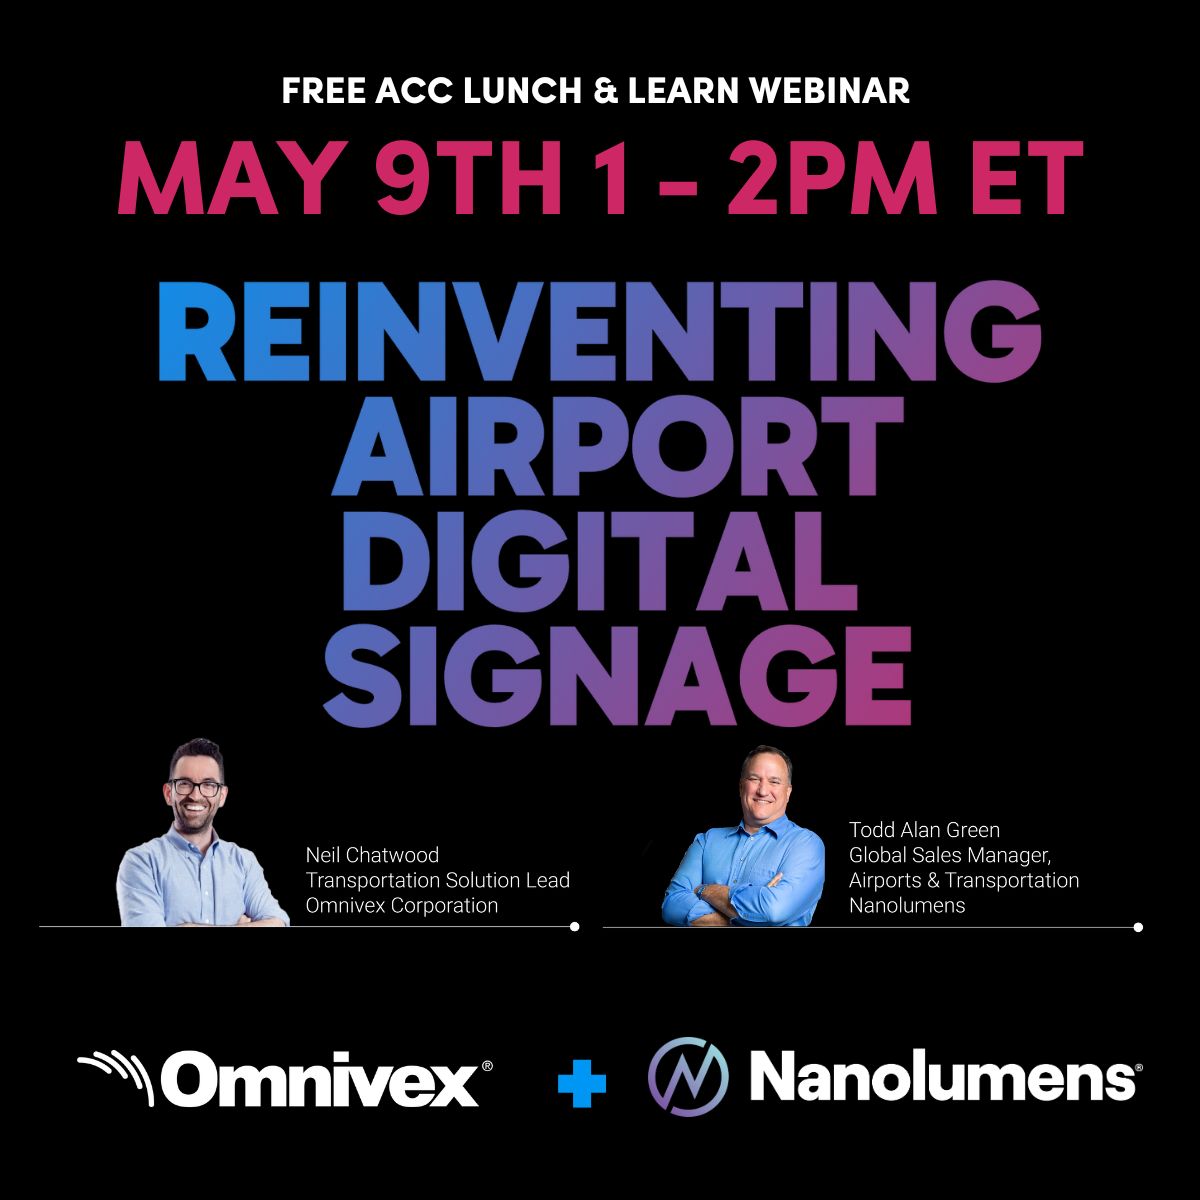 Join us for a insightful webinar alongside @Omnivex on May 9th at 1pm ET. We will chat about how to identify important considerations for selecting DVLED, how to apply best digital signage practices to future projects, and more! lnkd.in/eY-wj5x5